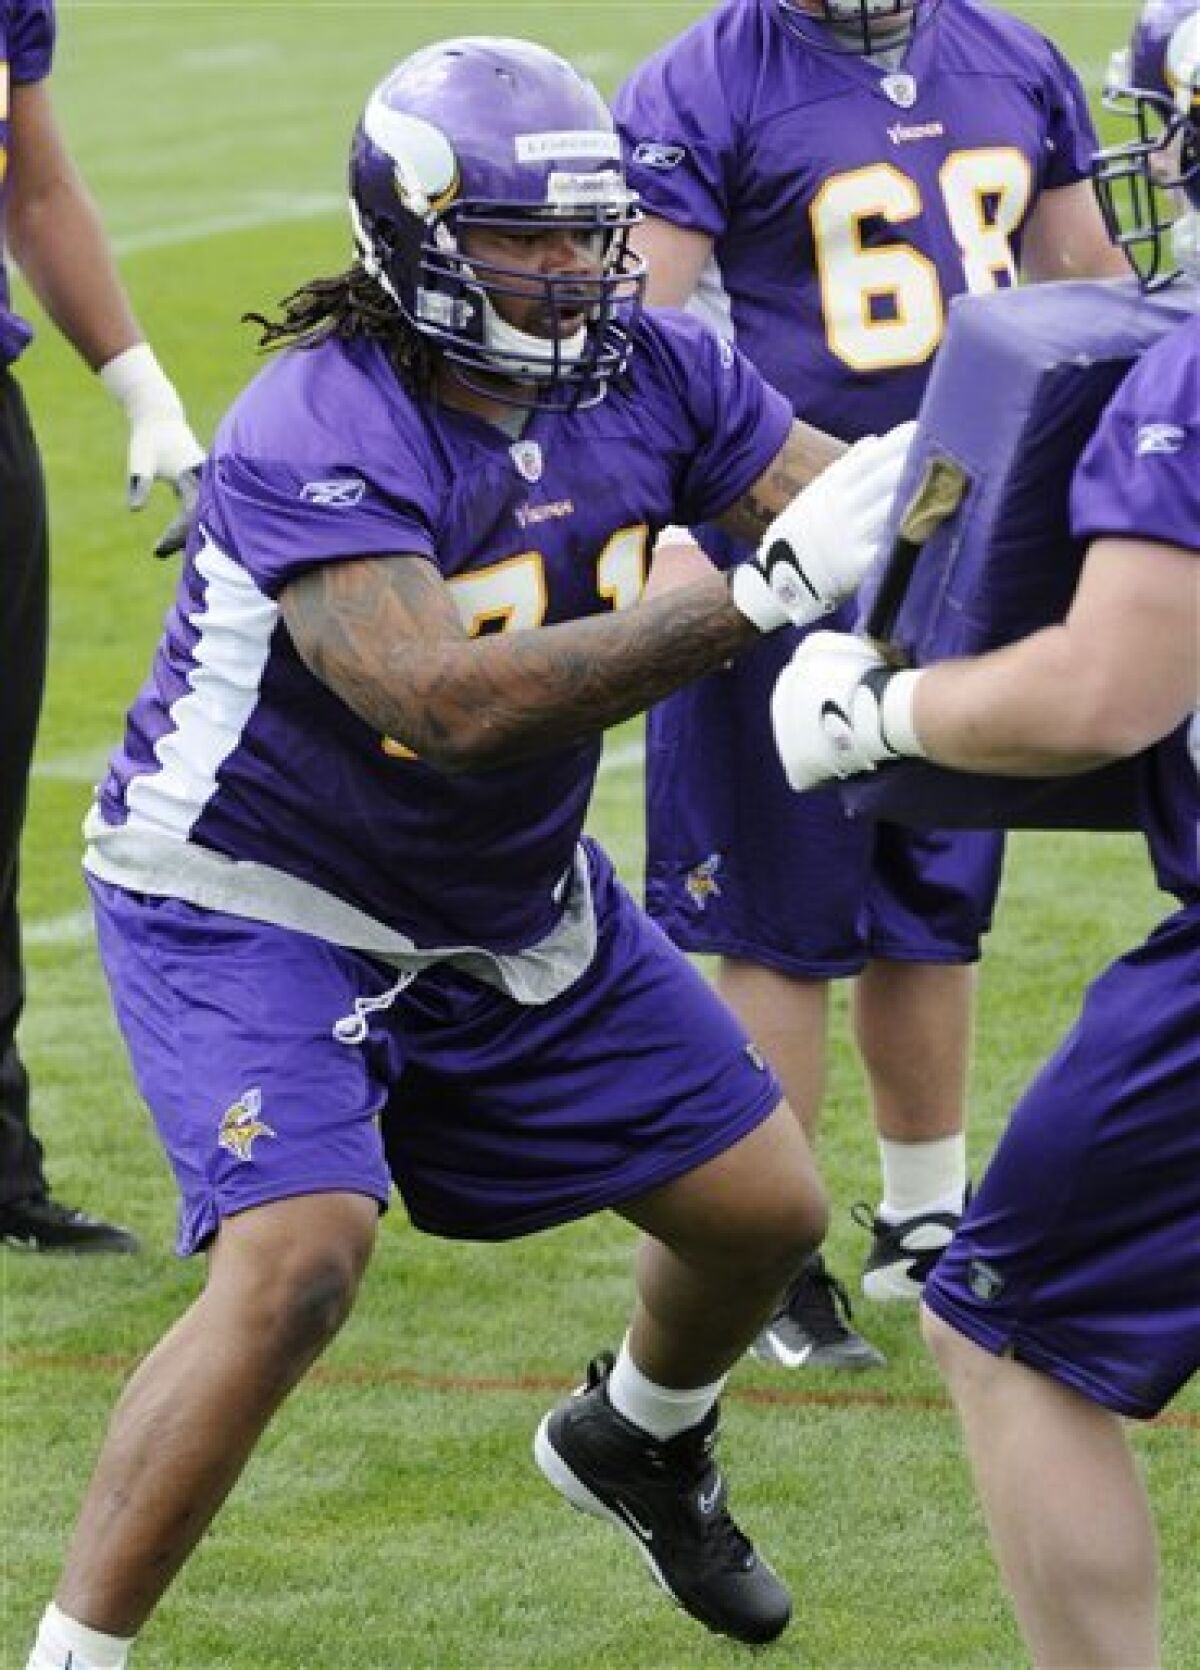 Minnesota Vikings tackle Phil Loadholt, left, a second-round draft pick, goes through drills during the Vikings' minicamp Friday, May 1, 2009, in Eden Prairie, Minn. (AP Photo/Jim Mone)